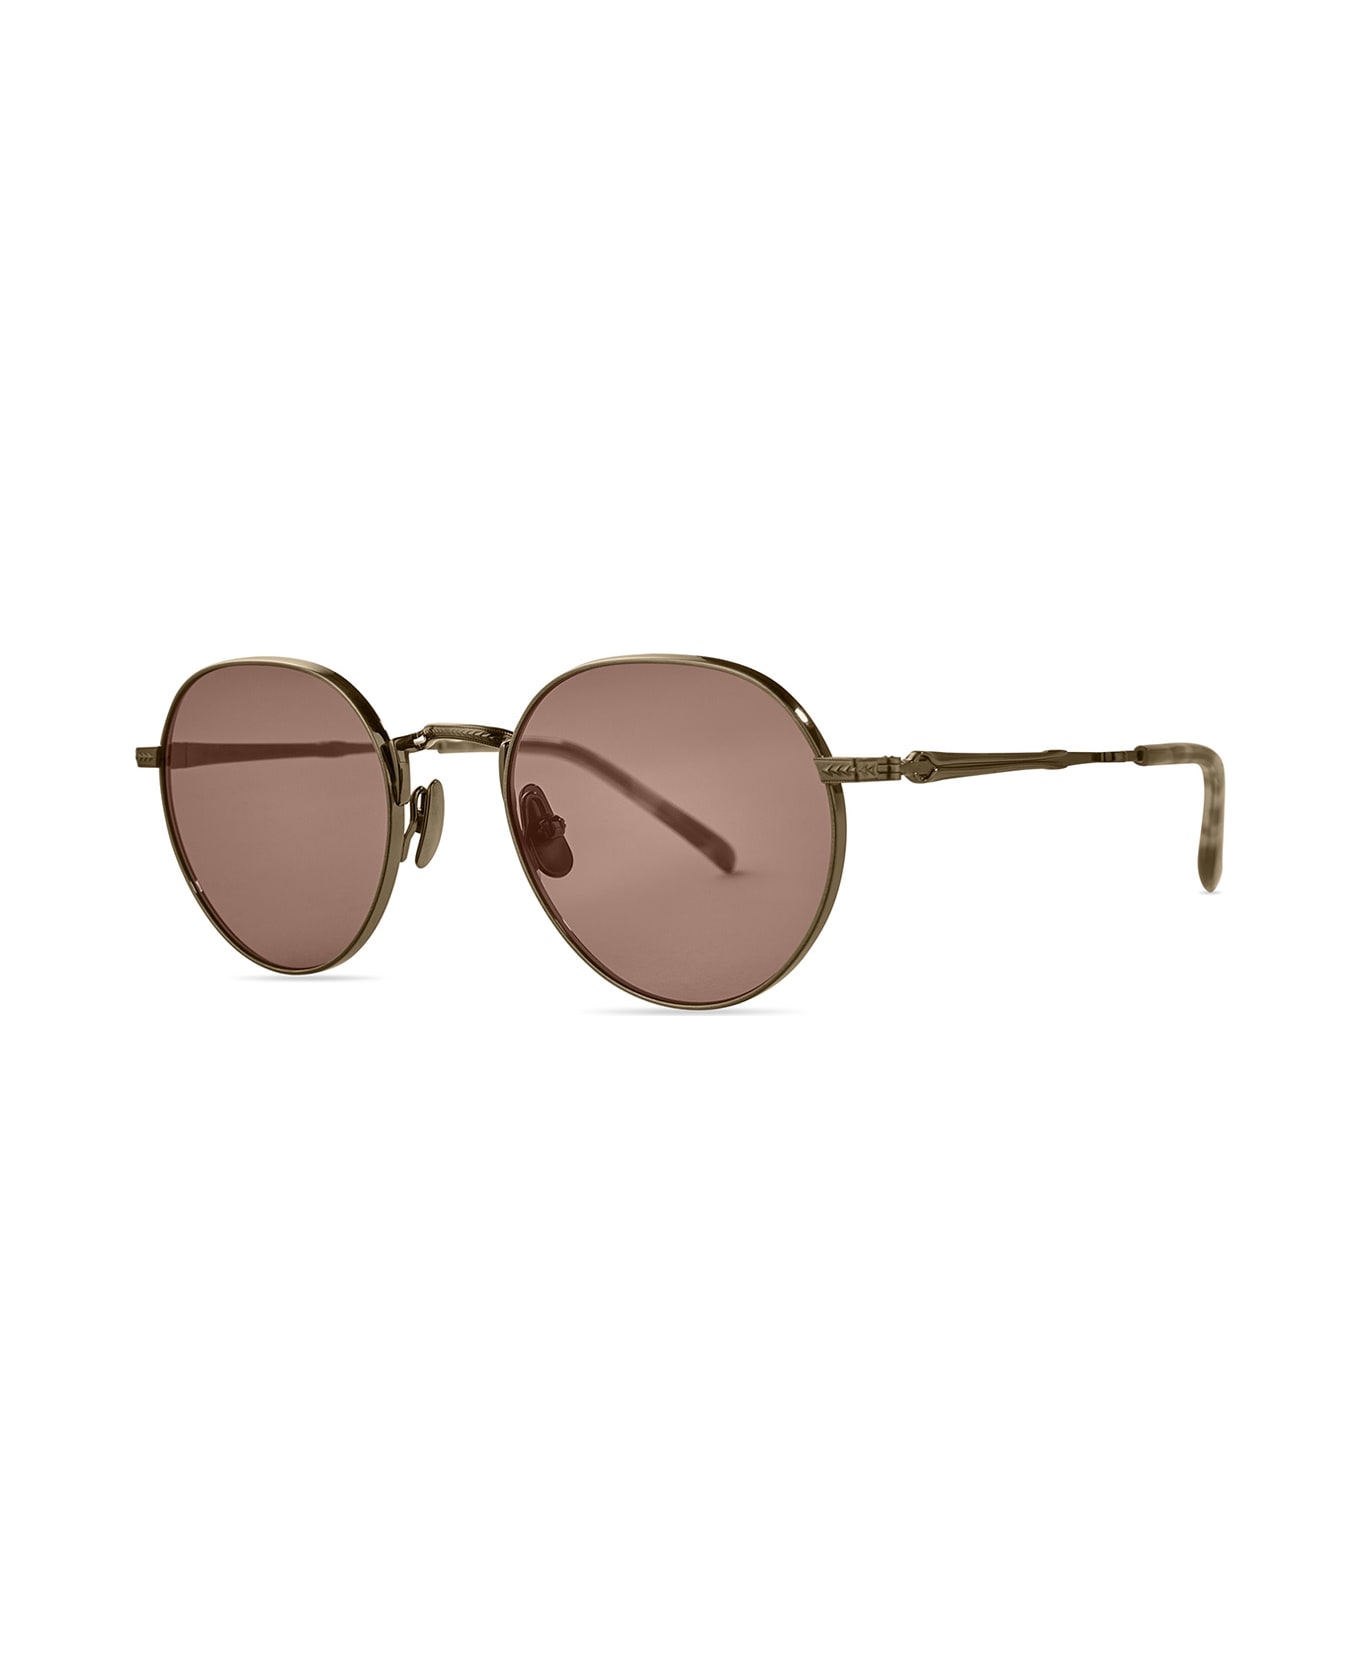 Mr. Leight Hachi S Antique Gold-blonde Shell/semi-flat Tahitian Rose Sunglasses - Antique Gold-Blonde Shell/Semi-Flat Tahitian Rose サングラス